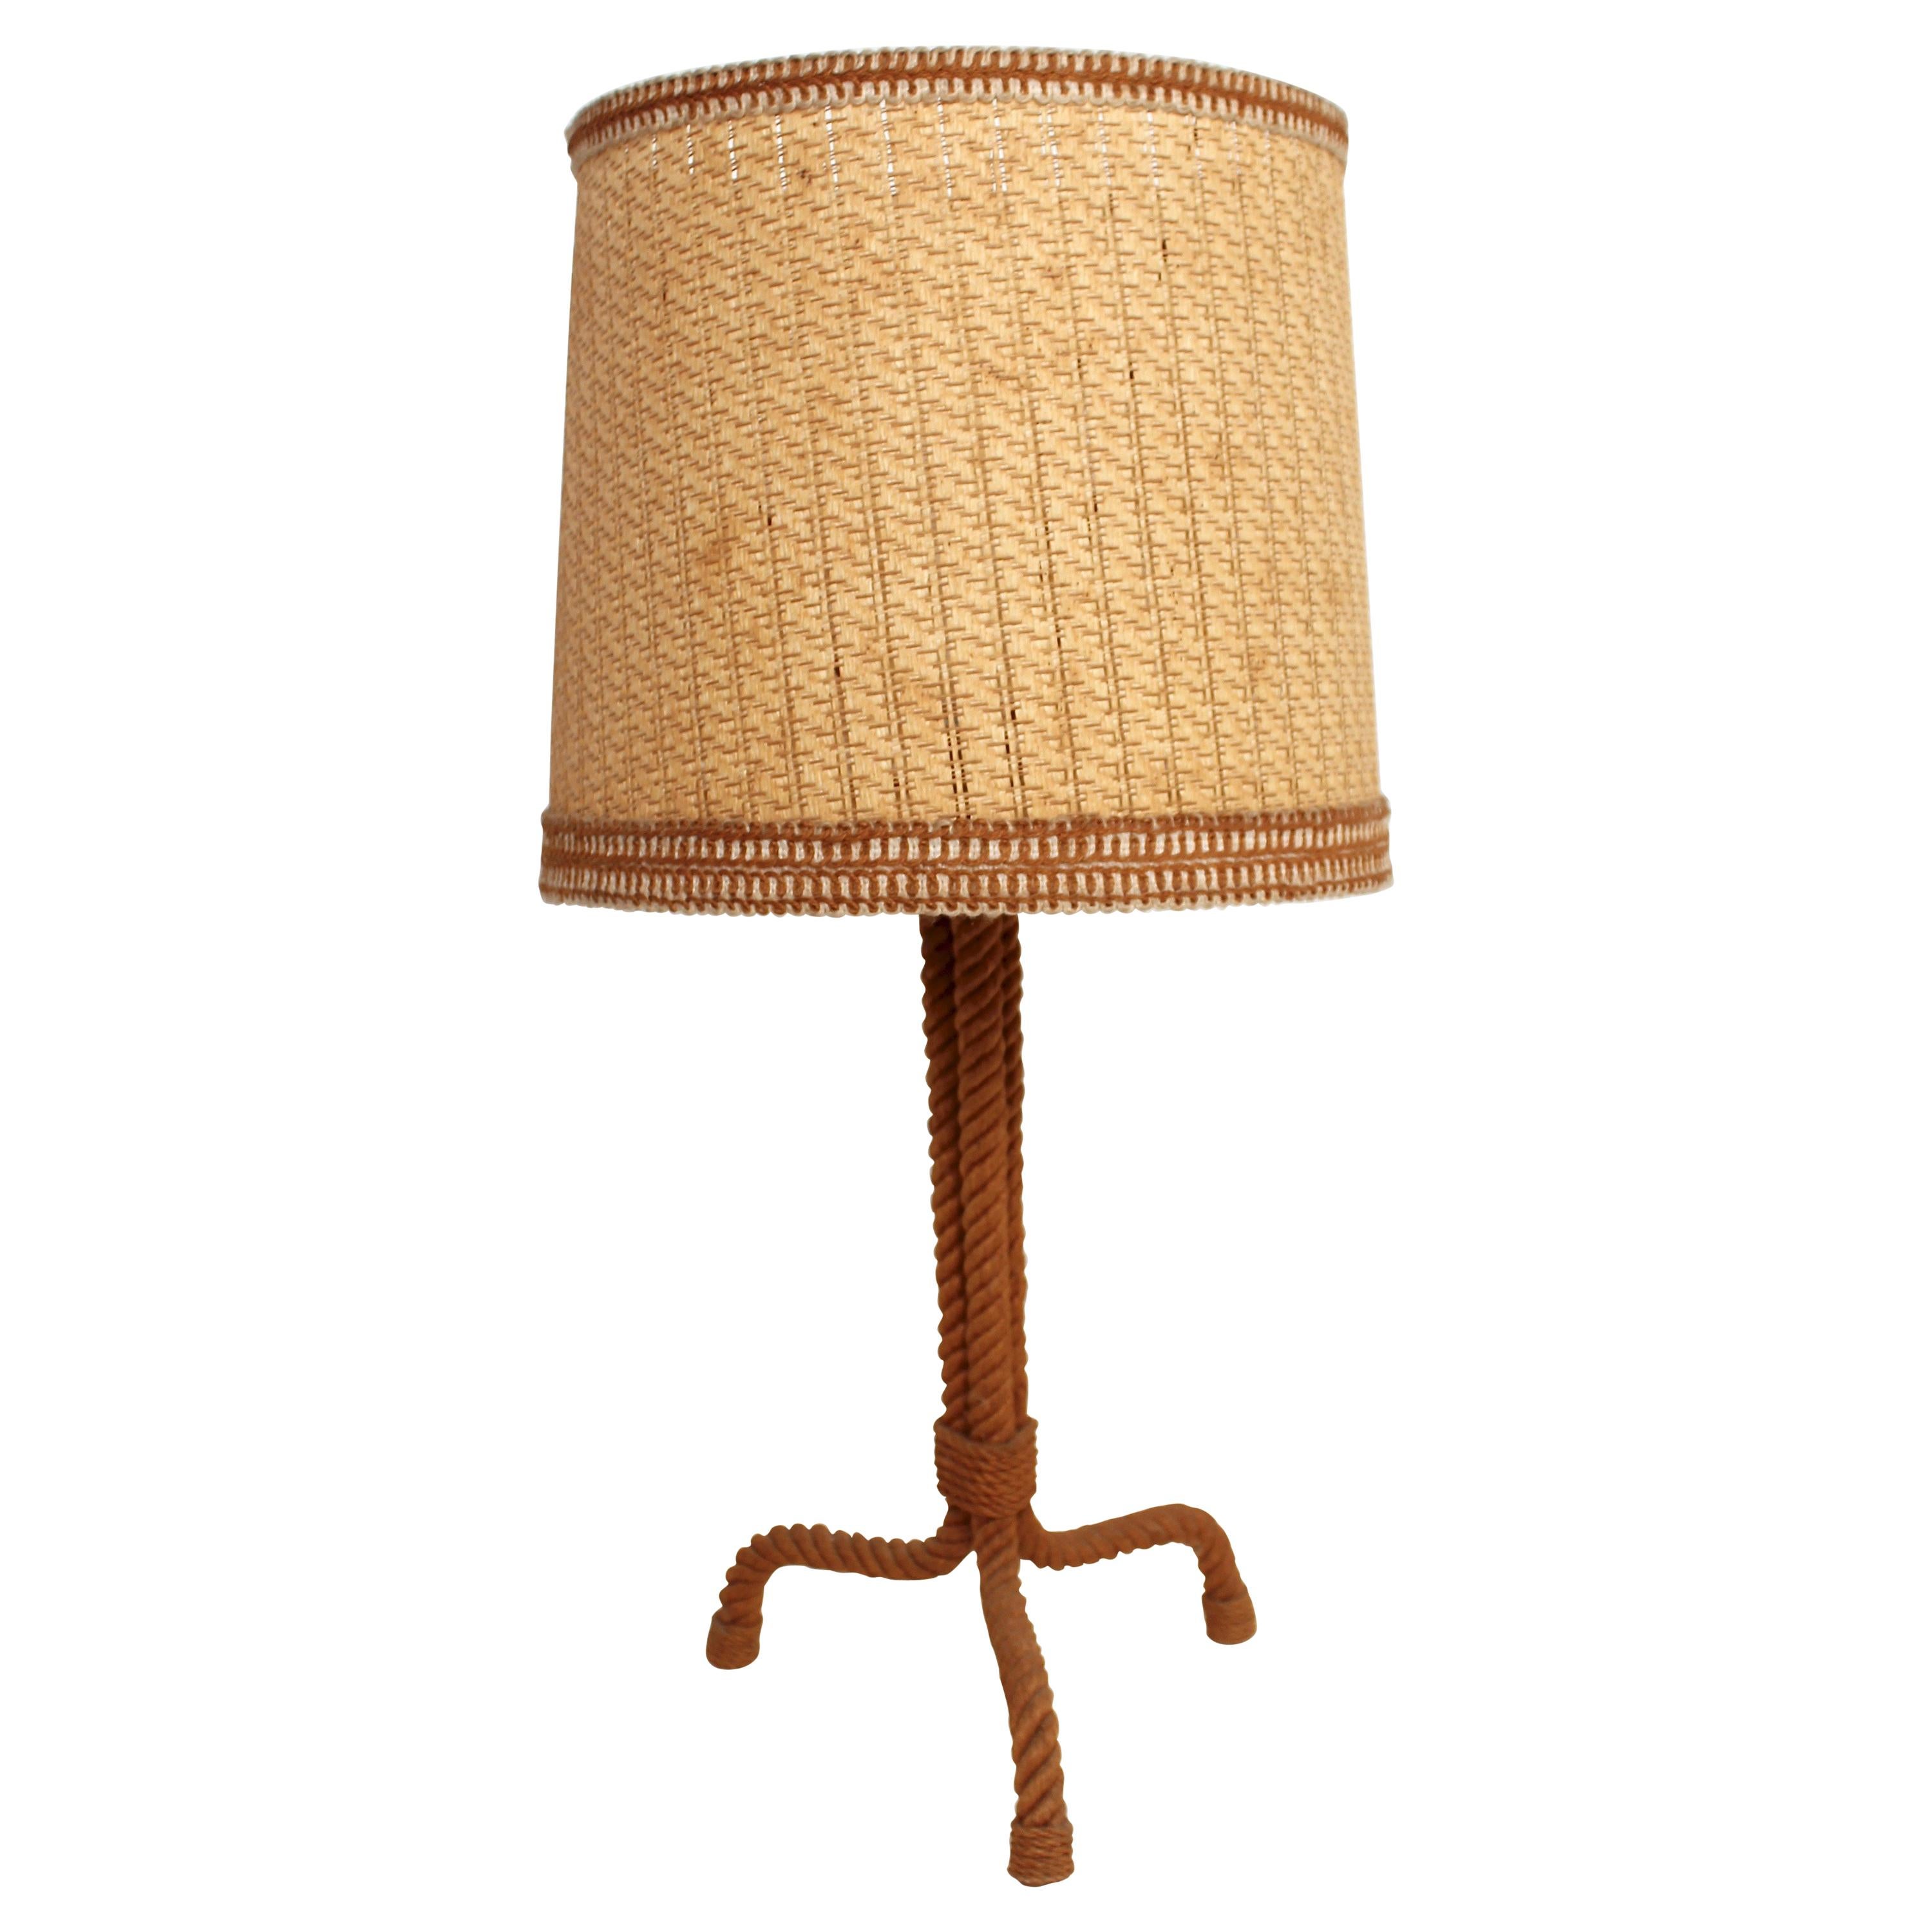 Audoux Minet Rope Table Lamp, 1950